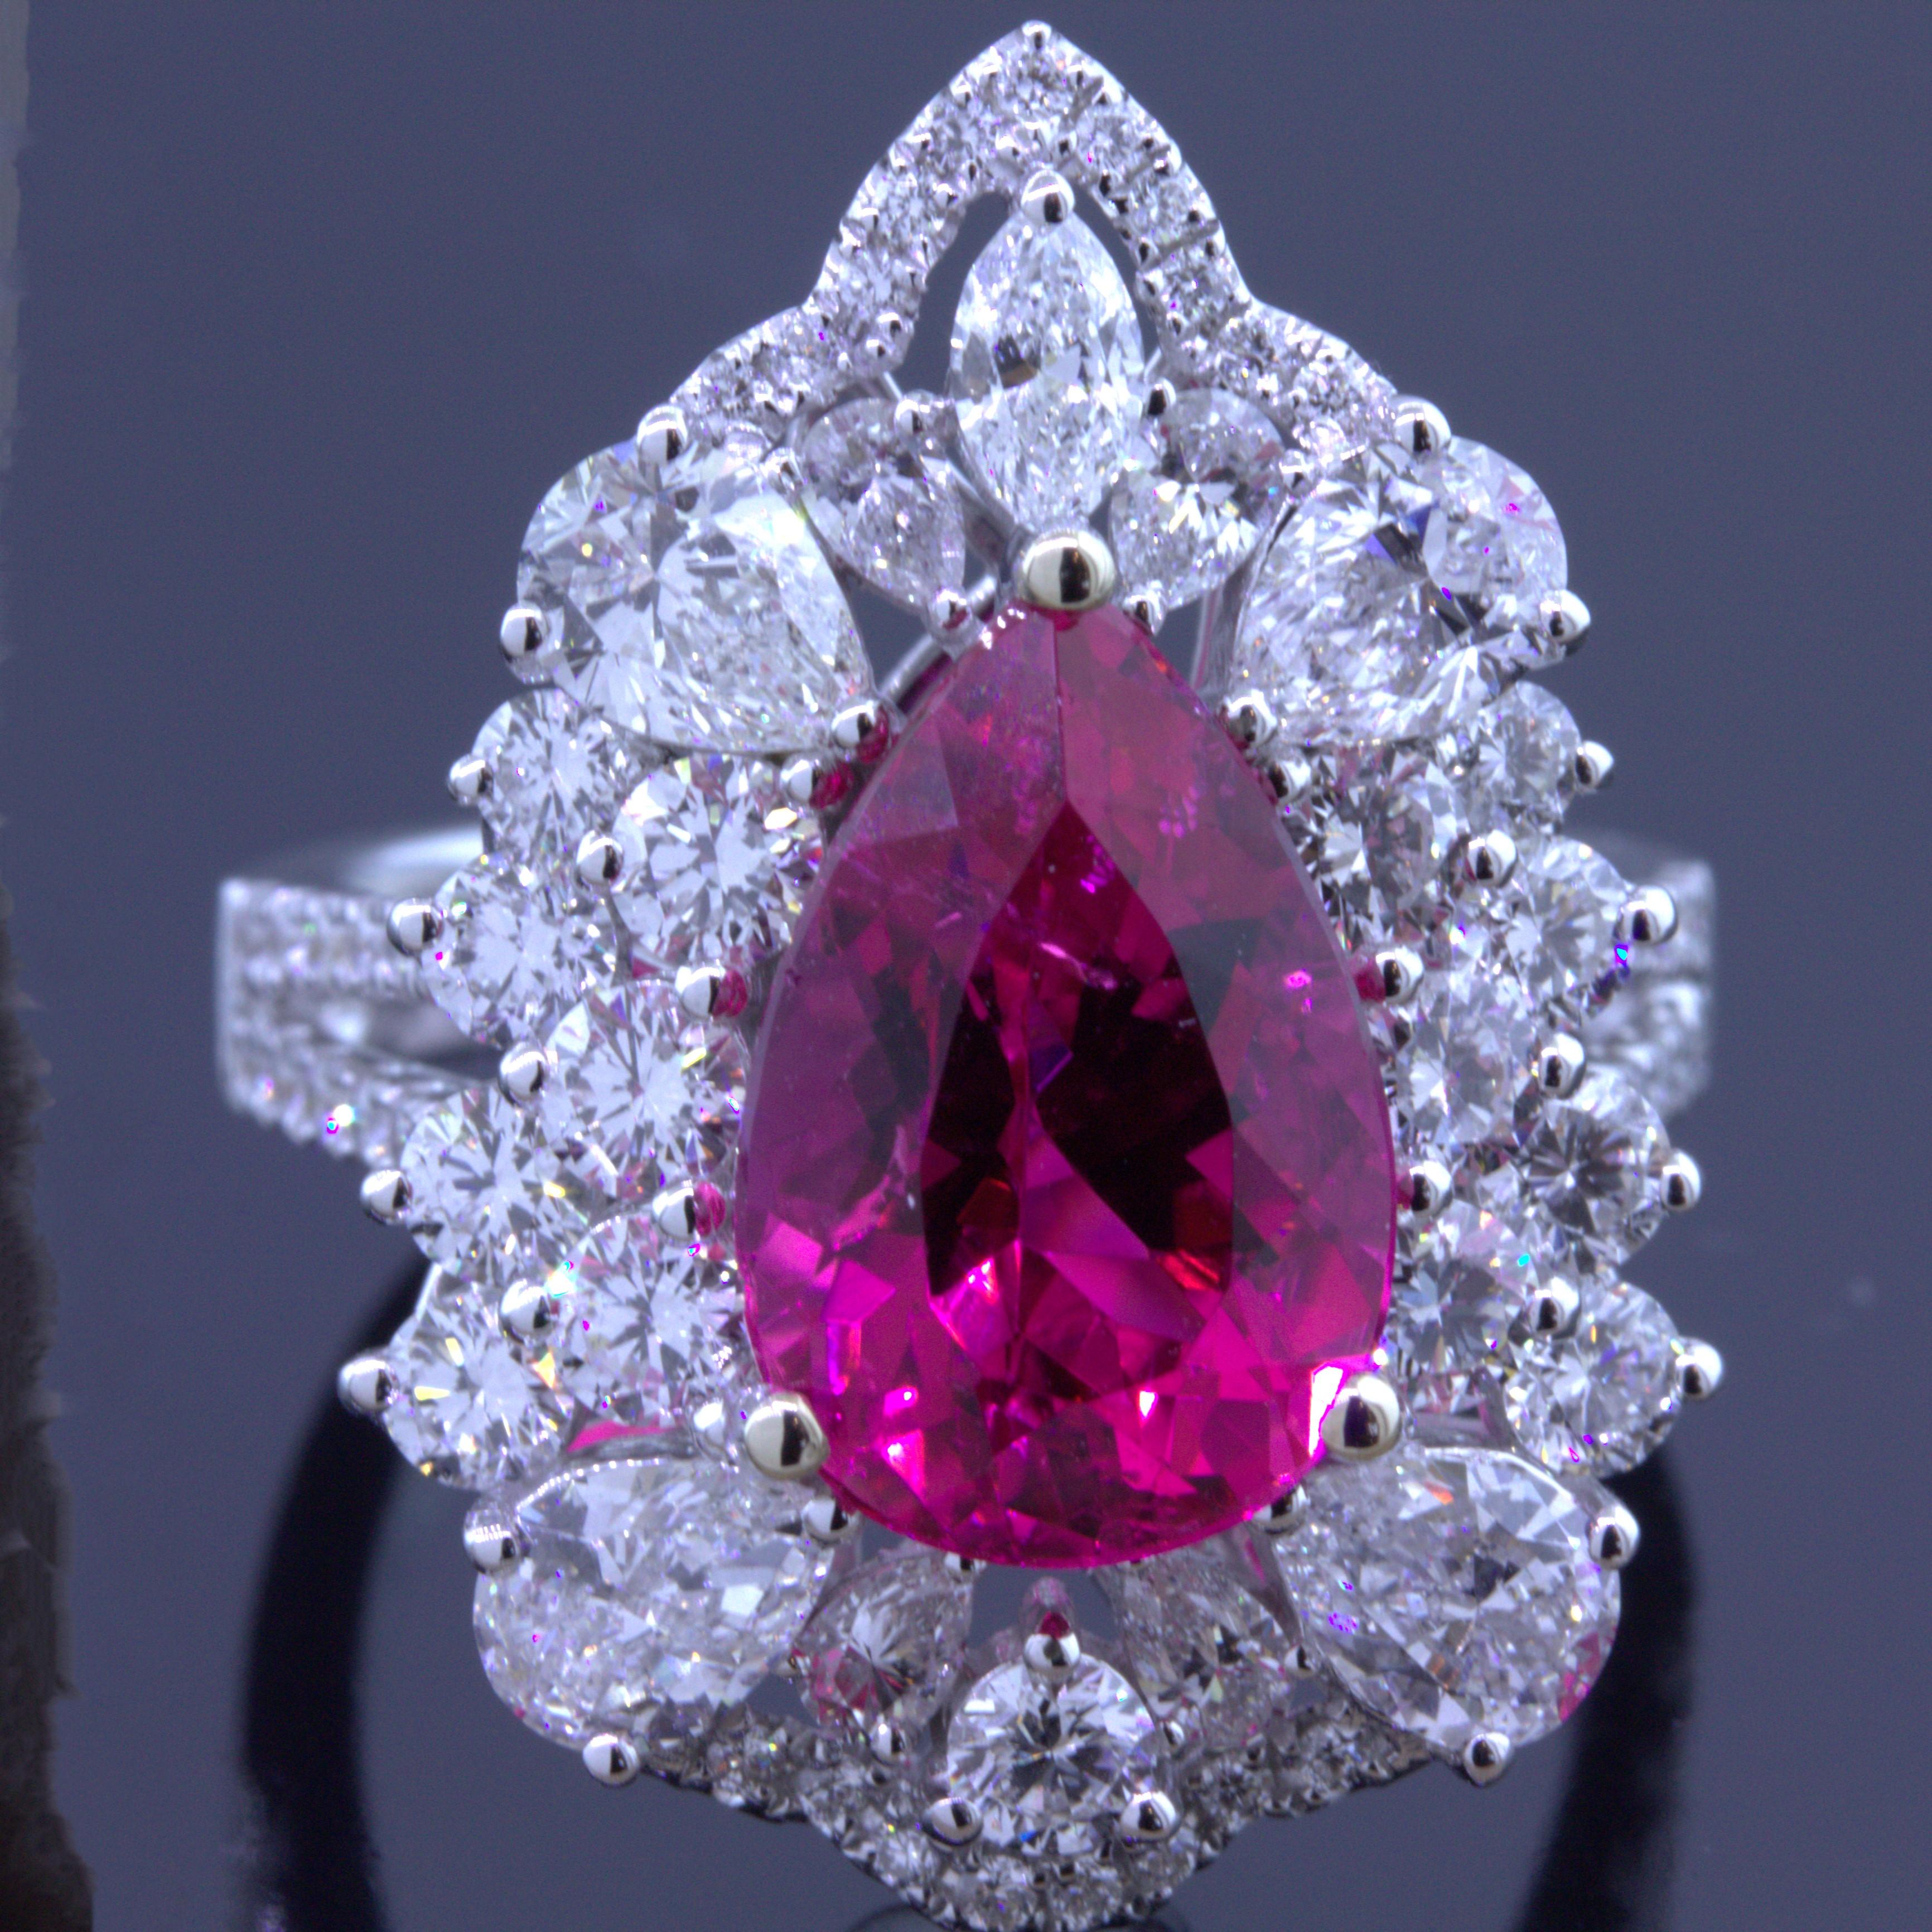 A super gem rubellite weighing 4.16 carats takes center stage. It is cut as a brilliant pear-shape and has a juicy and vibrant slightly pinkish-red color that will make you smile. The gem is full of light and brilliance. It is complemented by 2.91